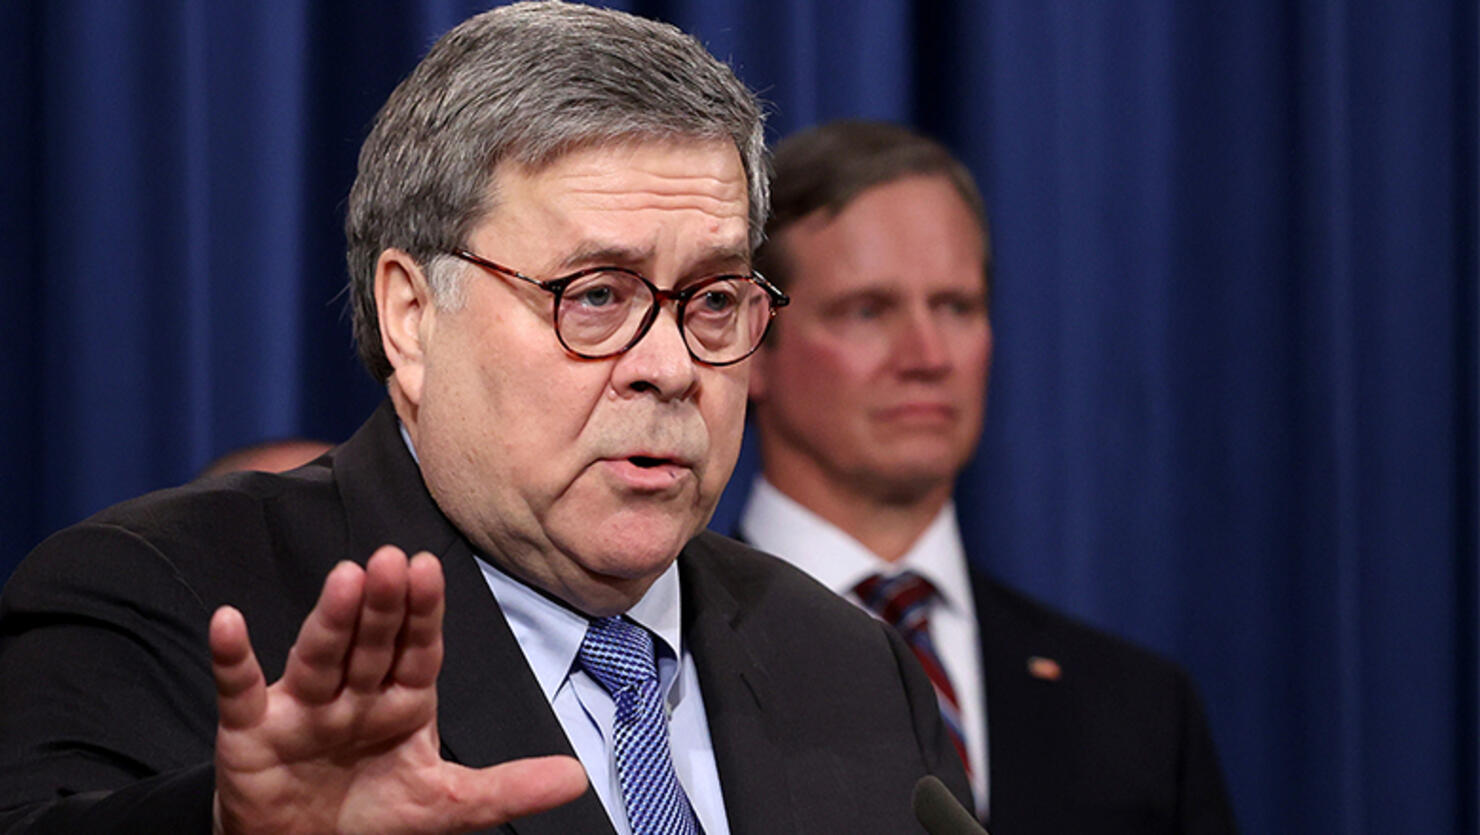 Attorney General Barr Announces Findings Into Pensacola Naval Base Shooting